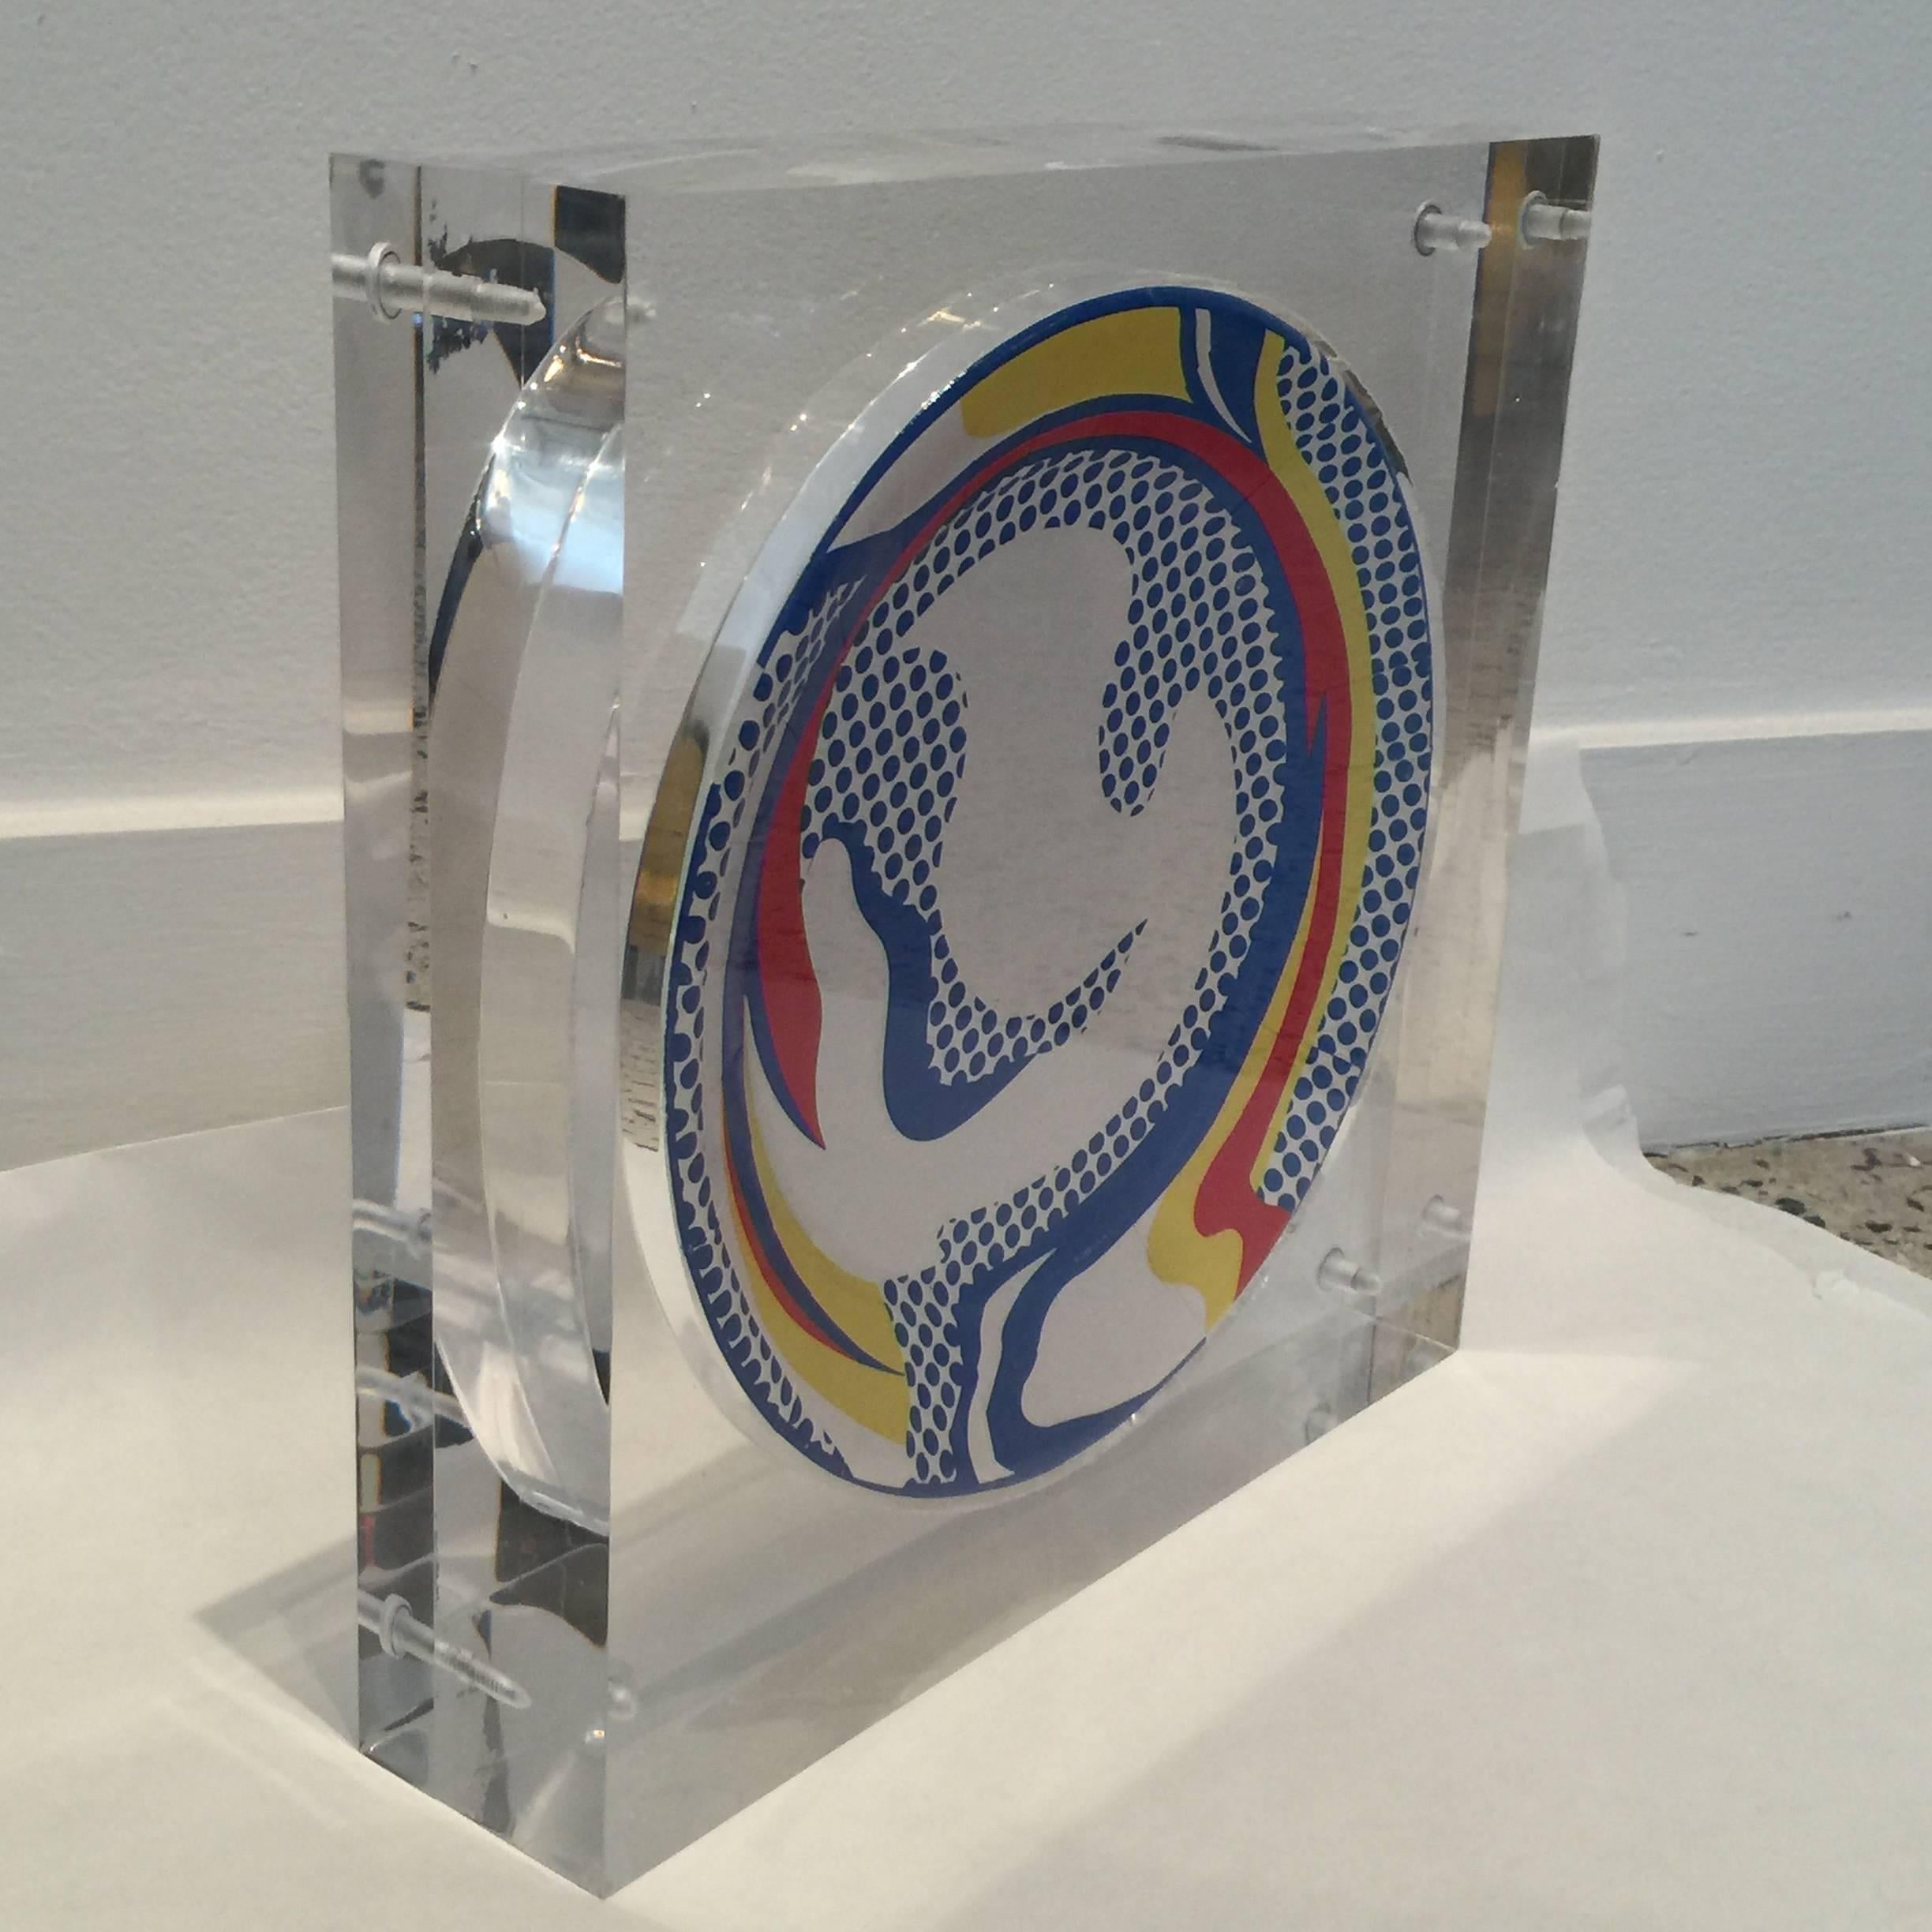 Created exclusively for Barneys of New York by the Estate of Roy Lichtenstein, the heavy and custom acrylic display box provides front and rear views of this master work. Stamped with artists signature on verso.

Dimension of plate is 11 inches.